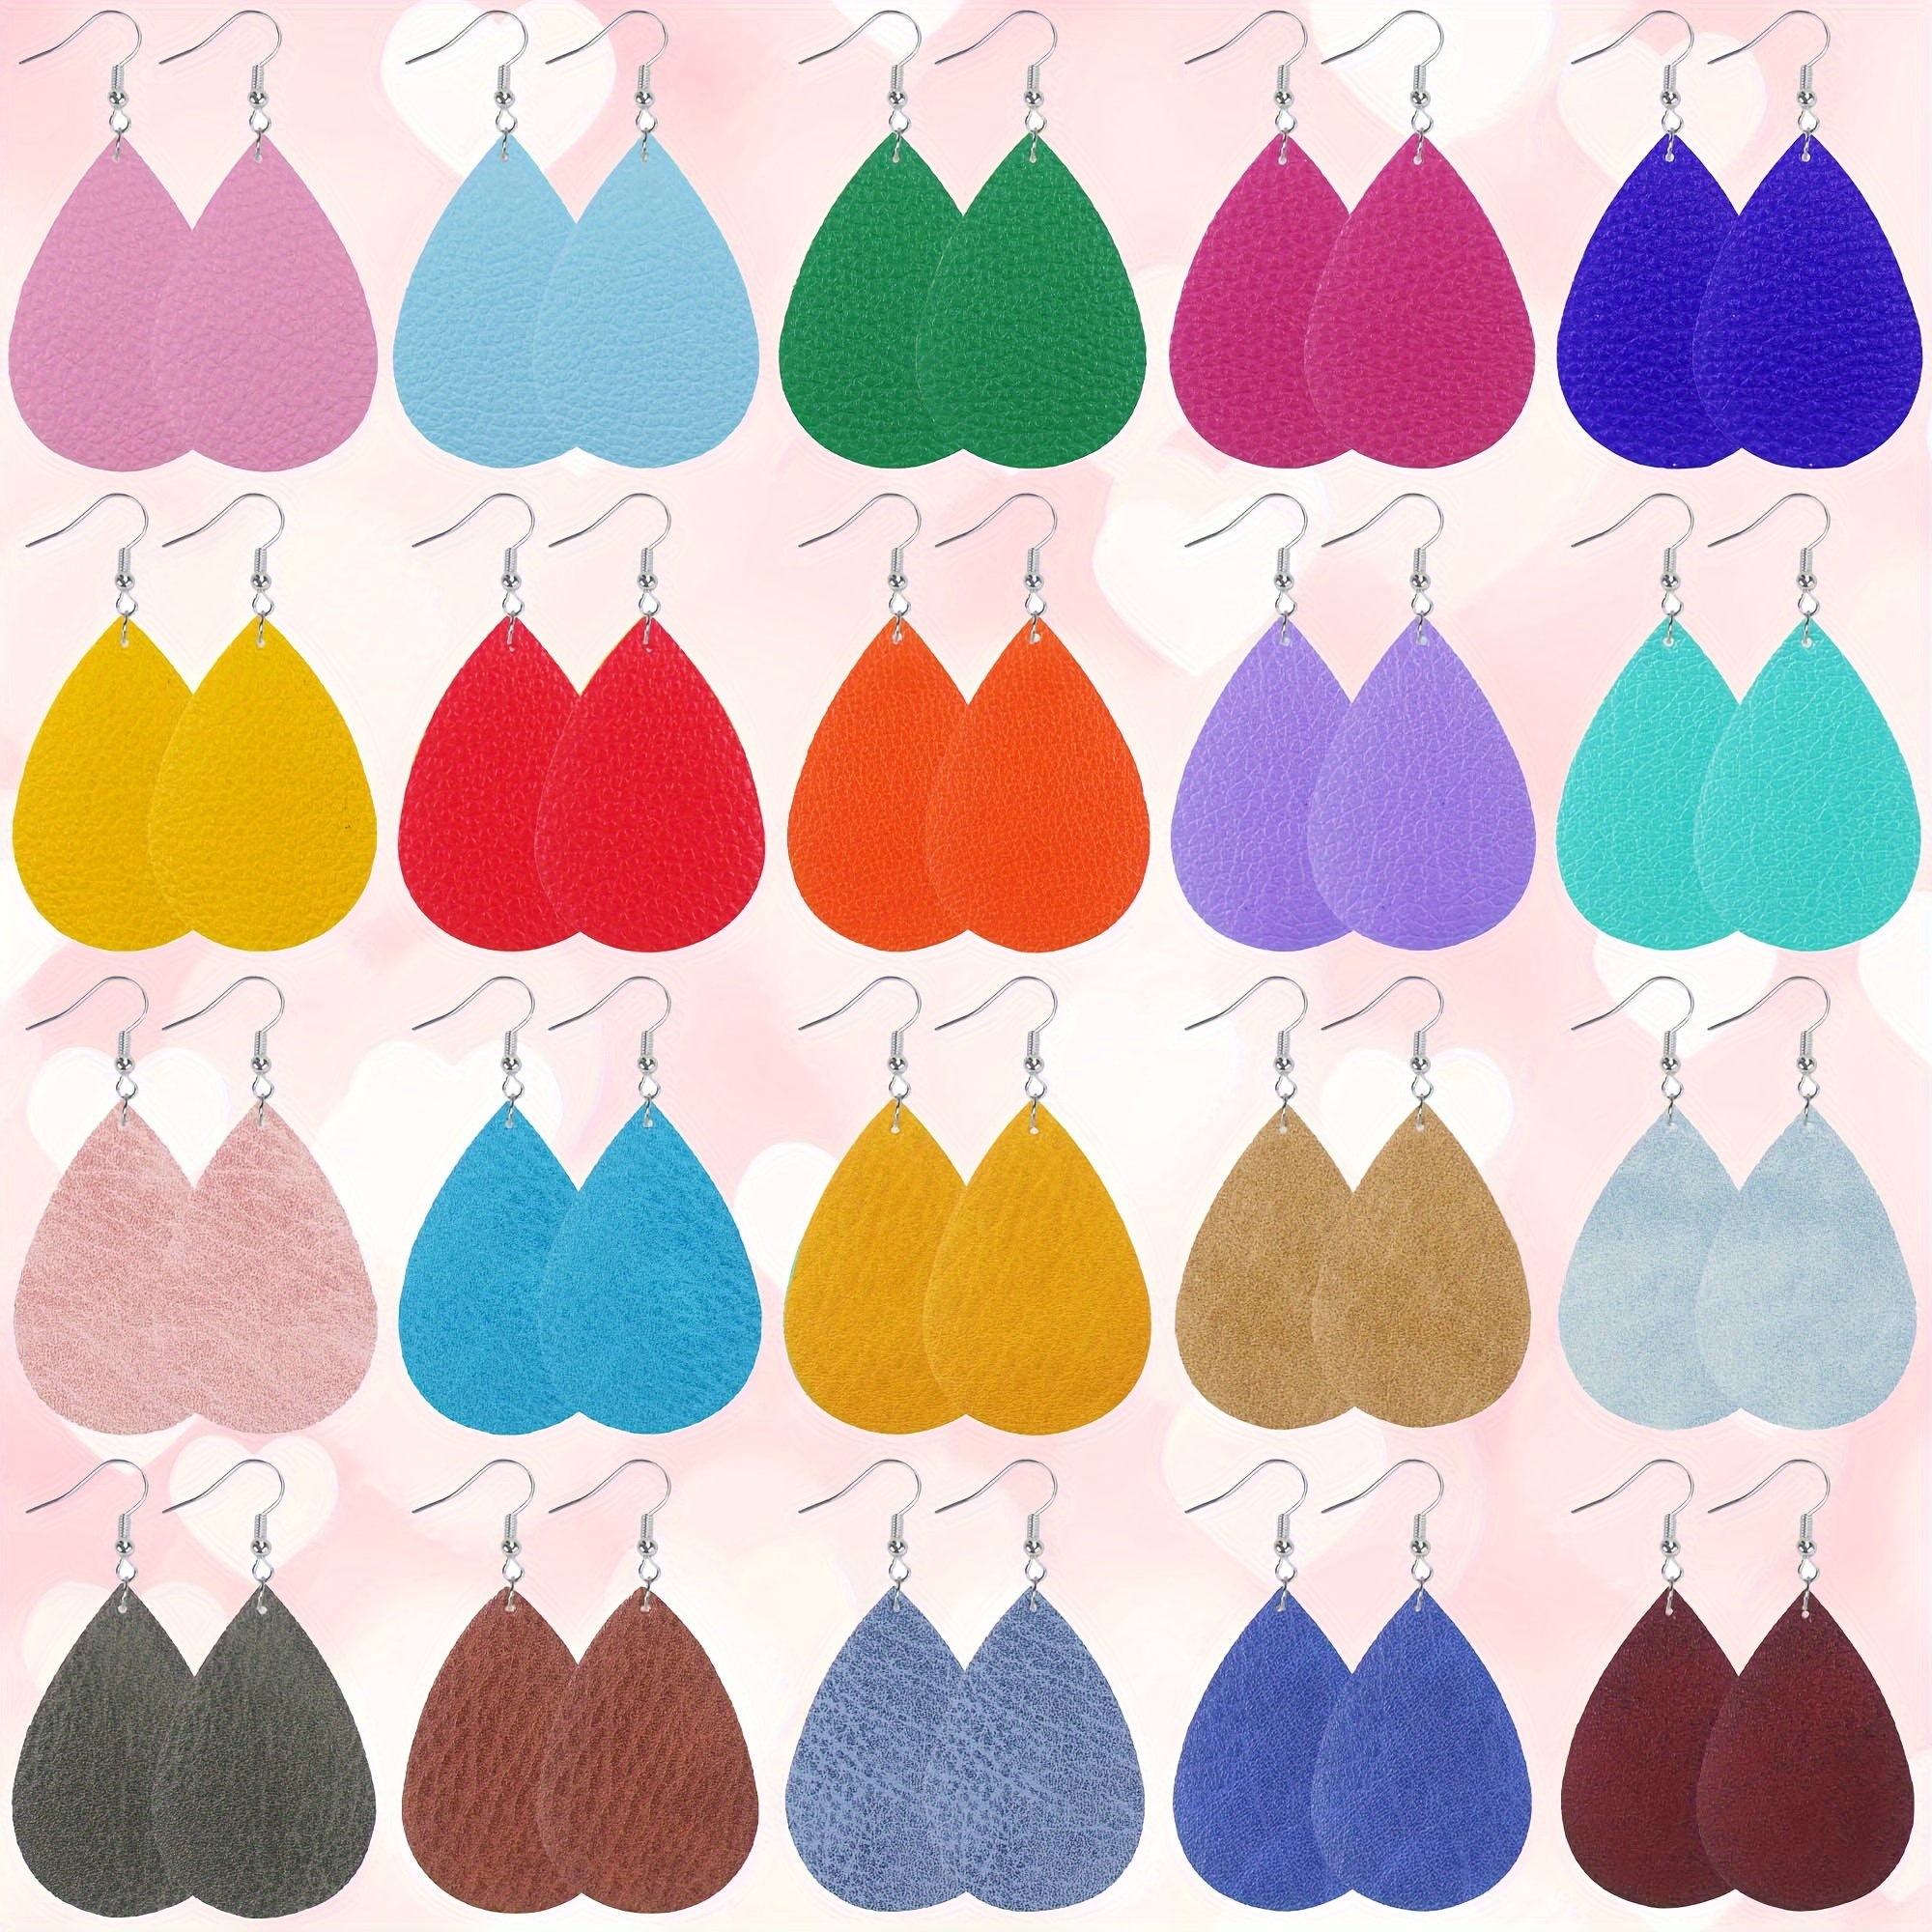 

20 Pairs Leather Dangle Earrings Set For Women, Teardrop Shaped Colorful Textured, Elegant And Cute Style, Gift-ready, All-season Fashion Jewelry Accessories